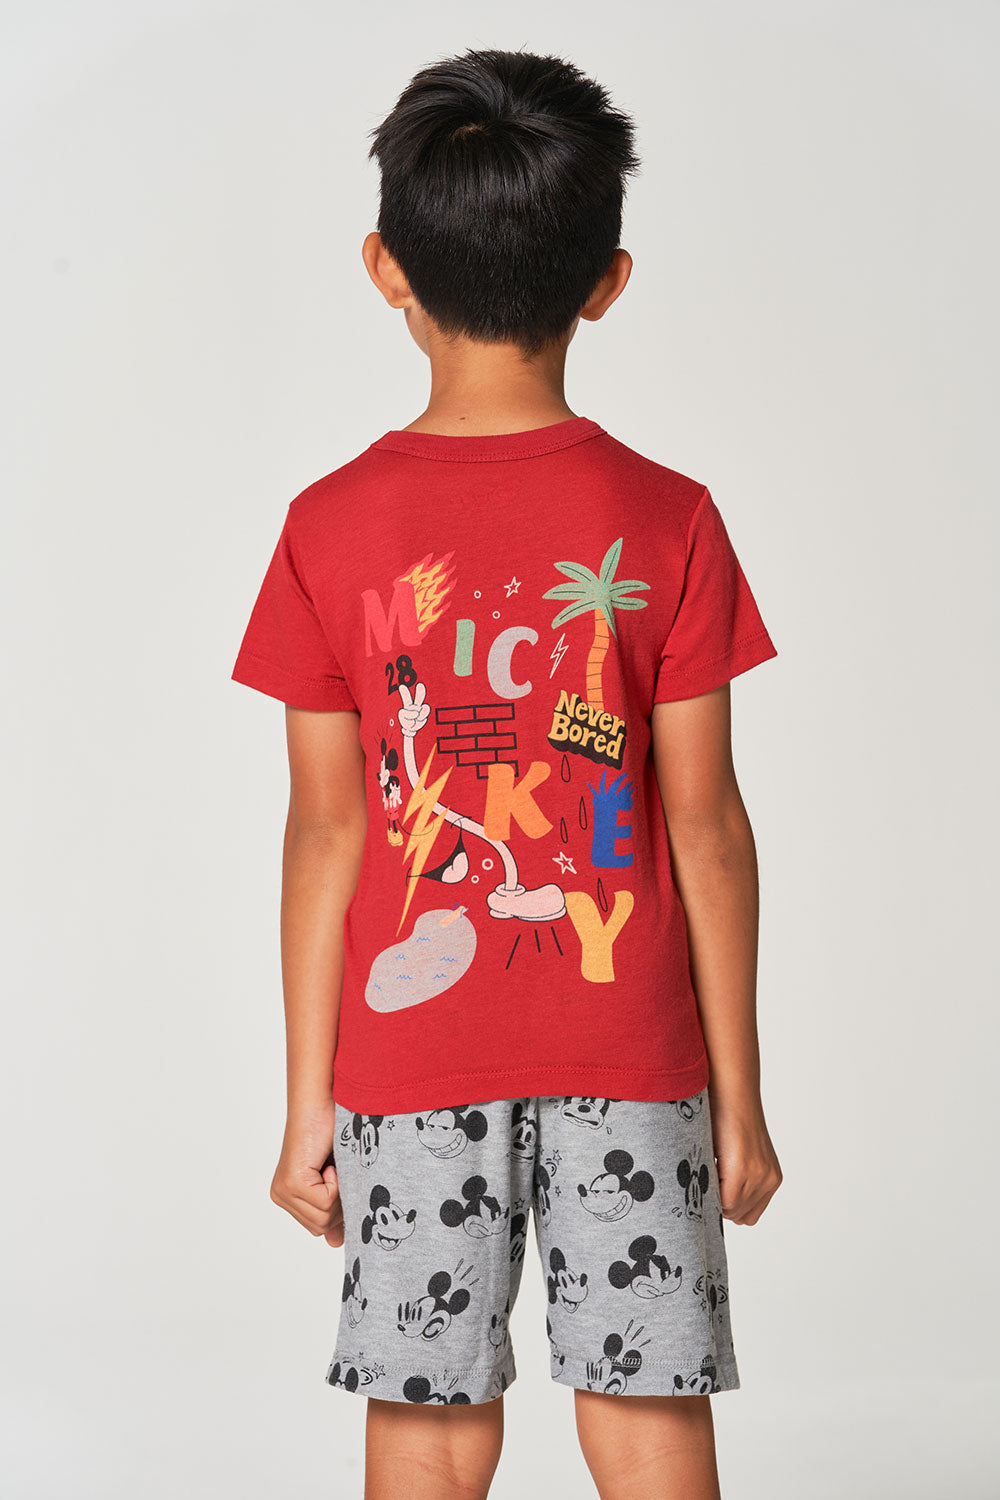 Disney Mickey Mouse - Mickey BOYS chaserbrand